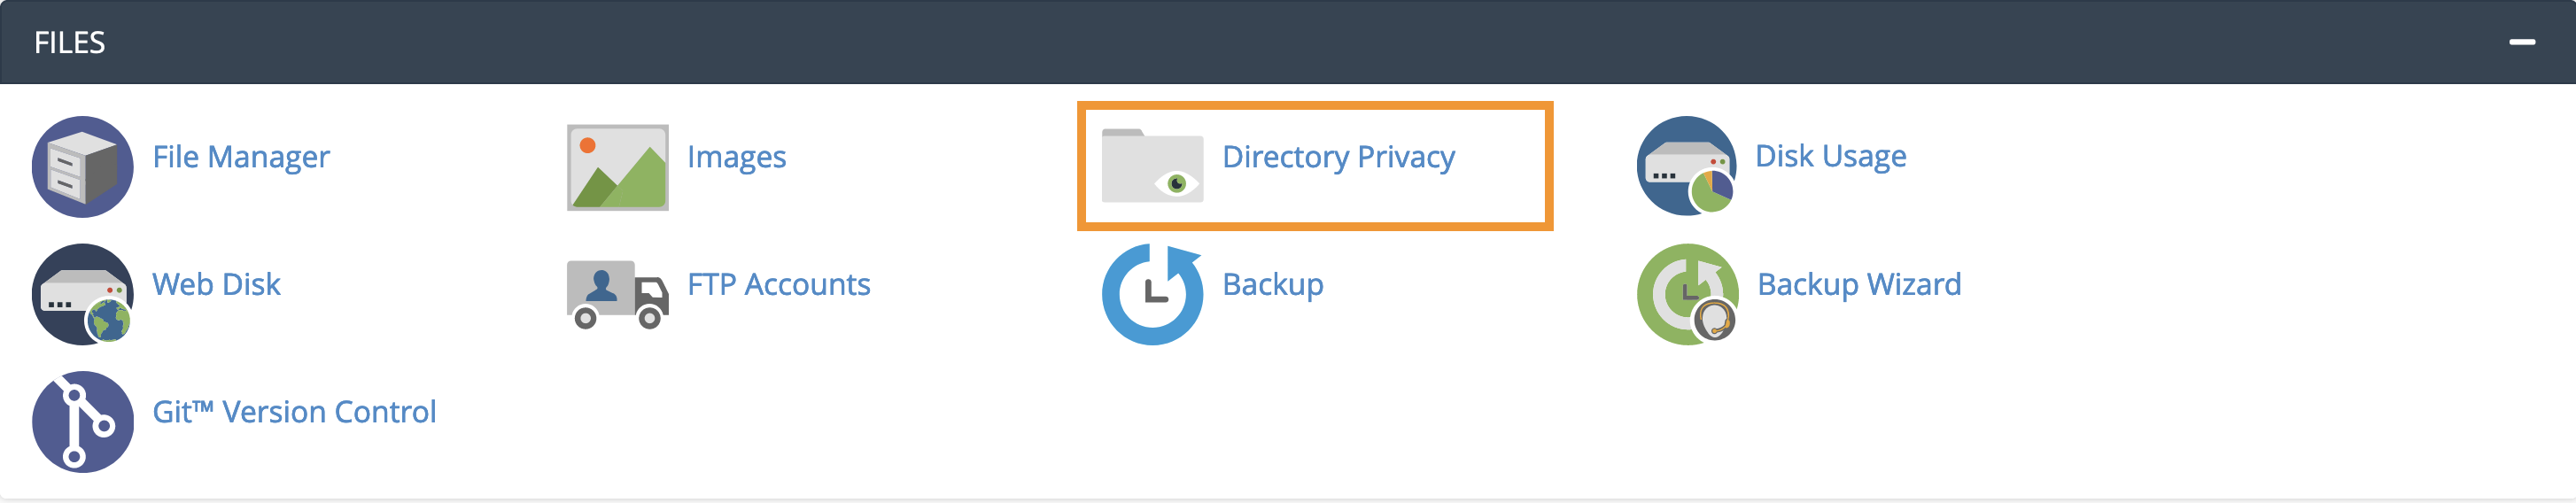 cpanel-directory-privacy.png